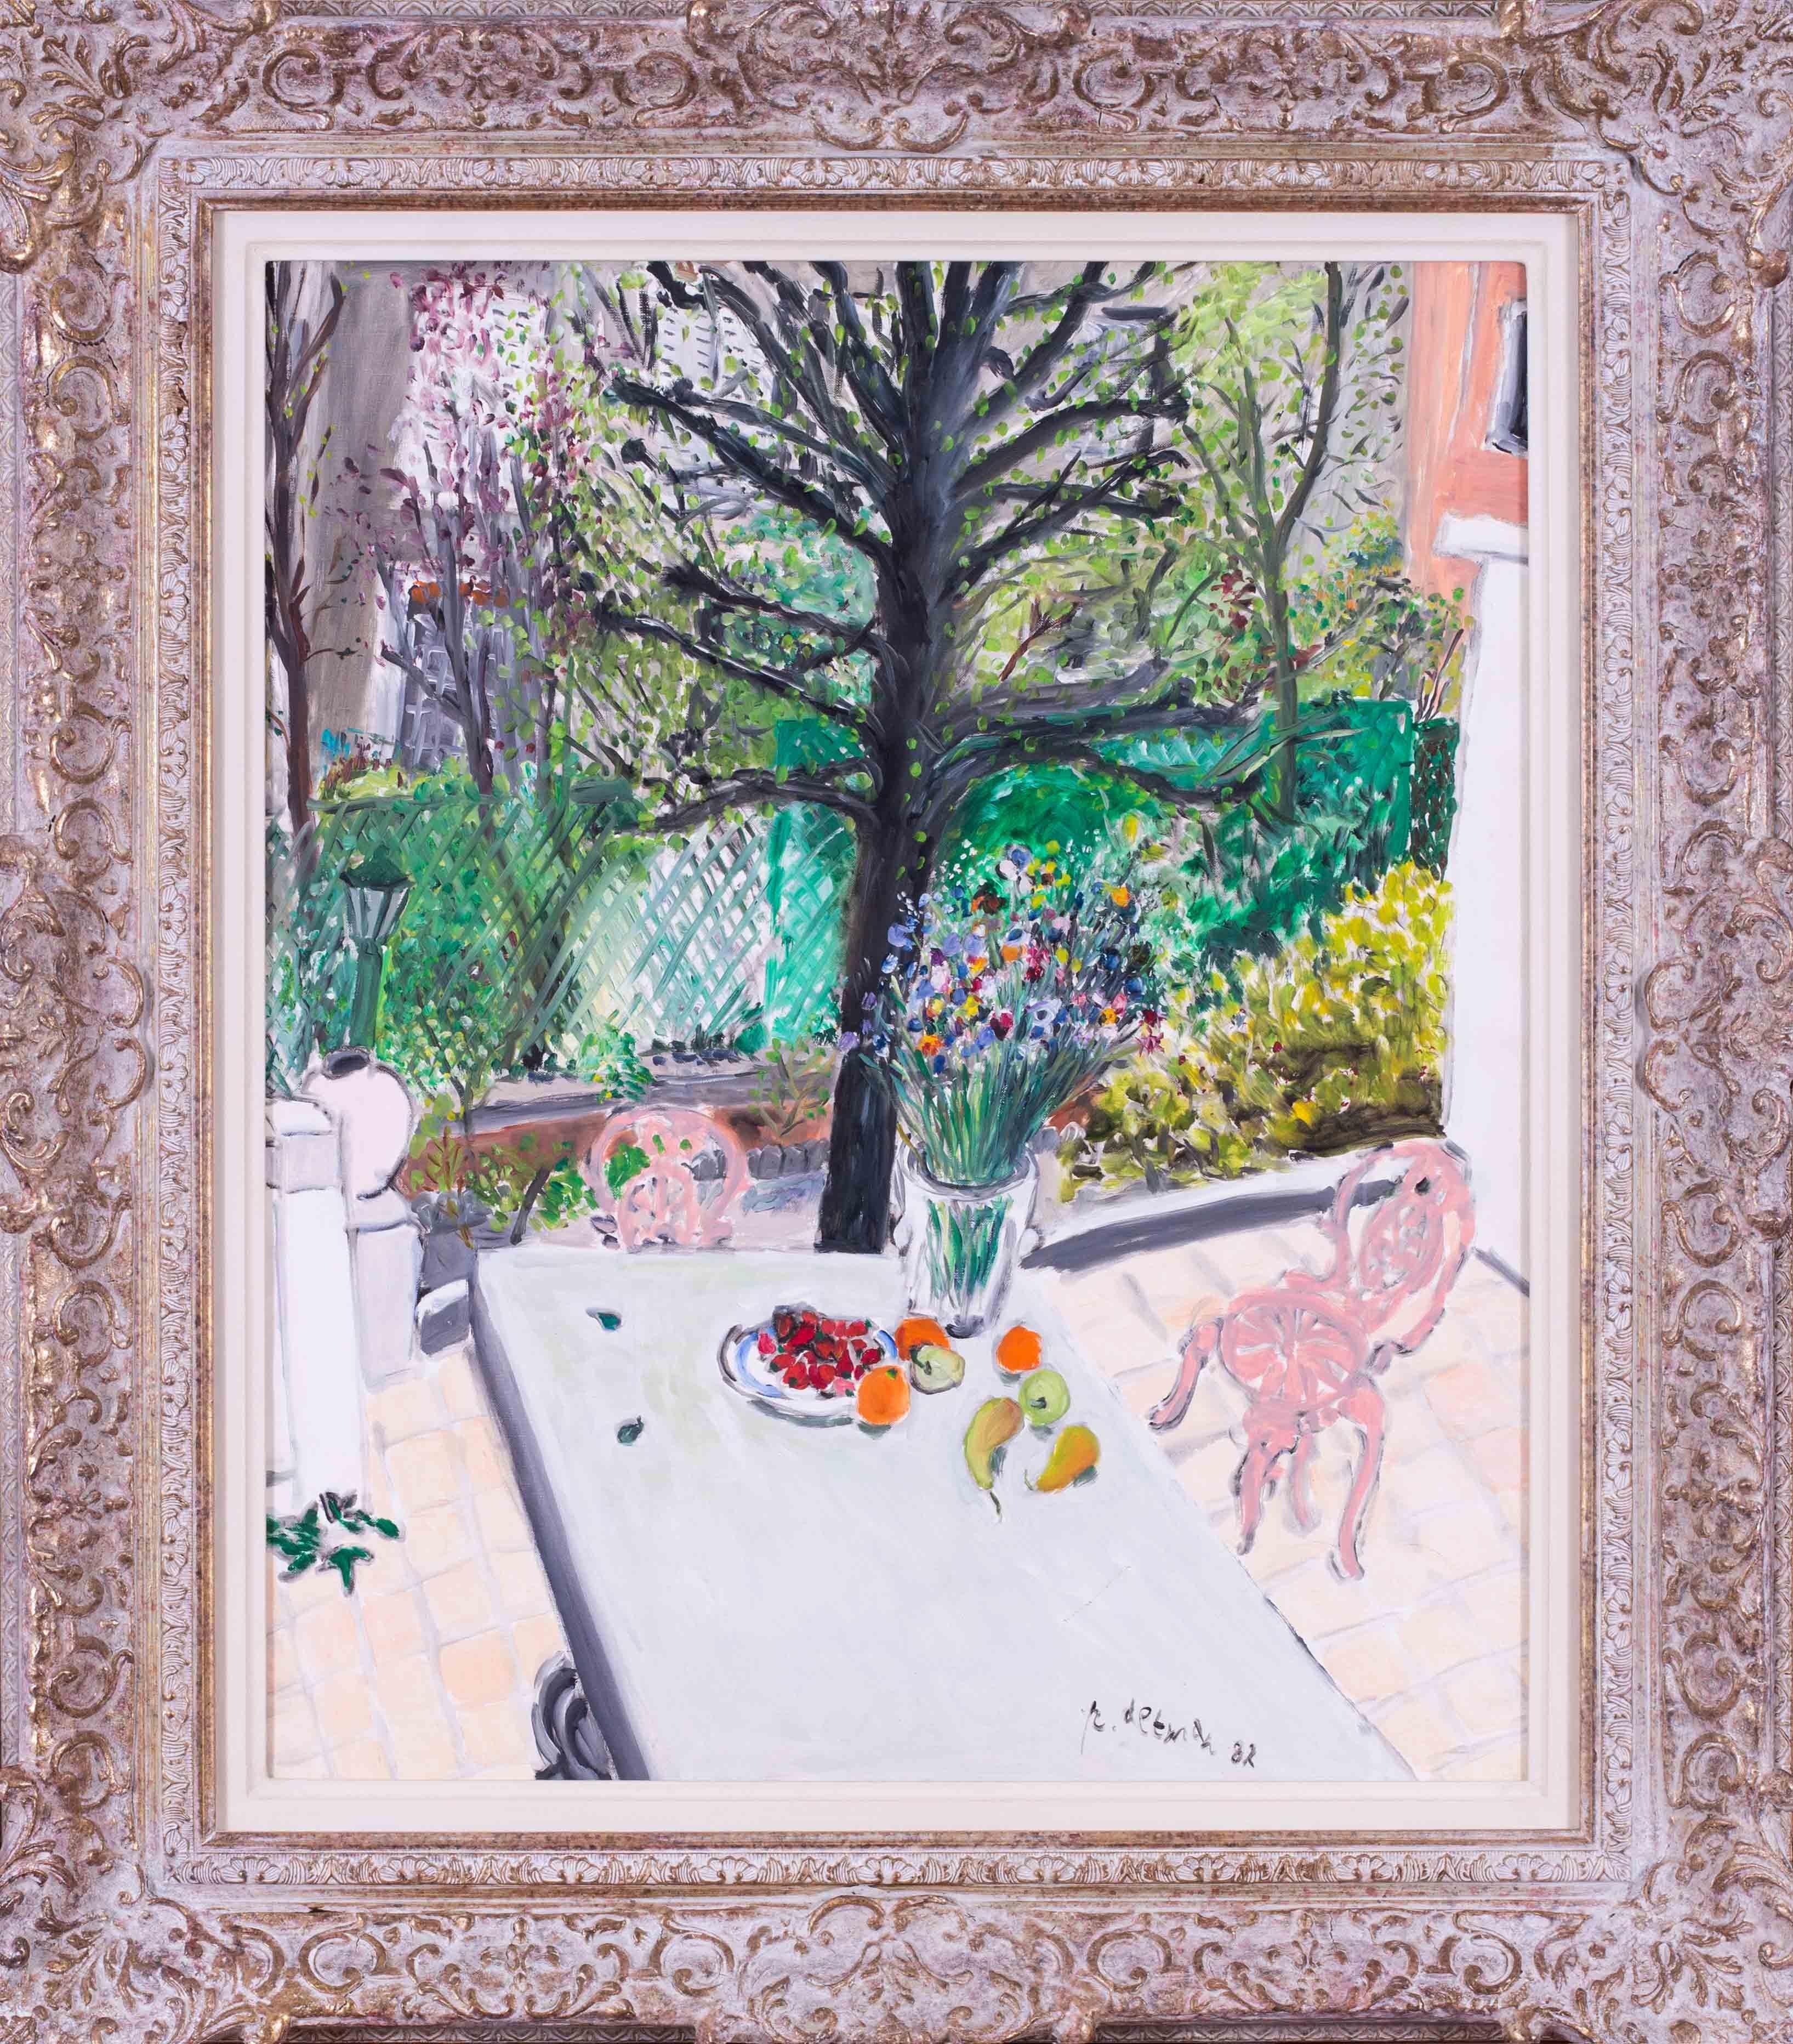 A very charming mid 20th Century, Post Impressionist work by Paul Altman.  Despite the limited information available about Altman, it doesn't diminish the alluring, naive charm emanating from his artwork.  This simple interior scene looking out on a